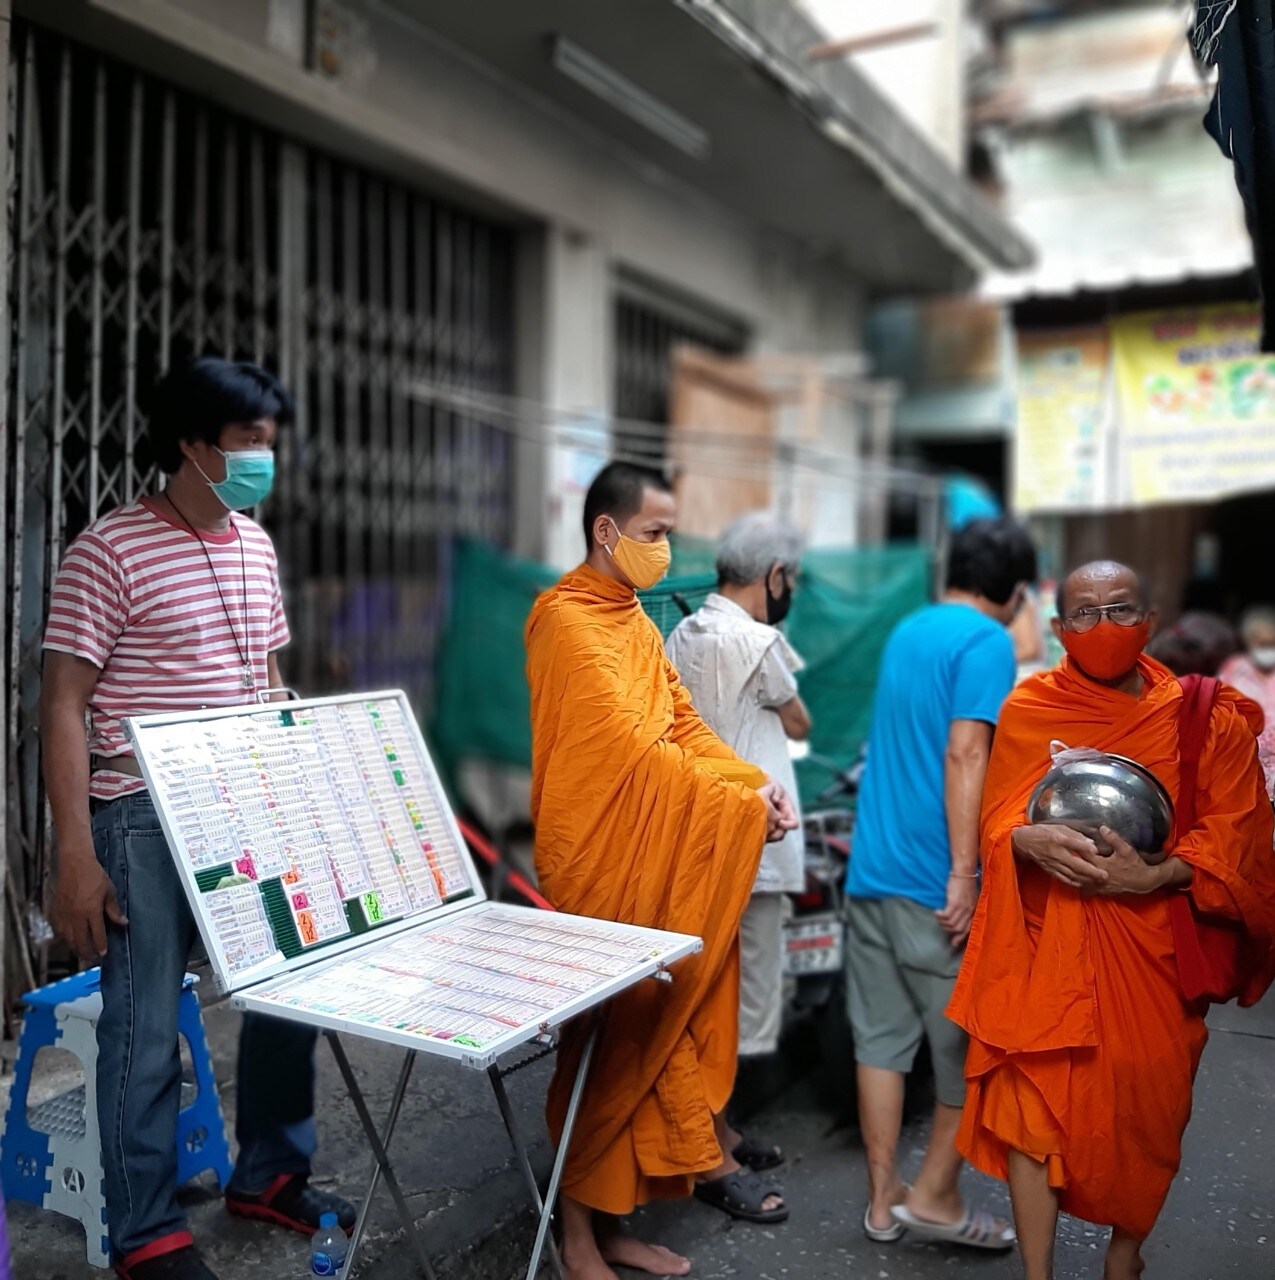 Photograph of monks and pedestrians wearing masks in Thailand